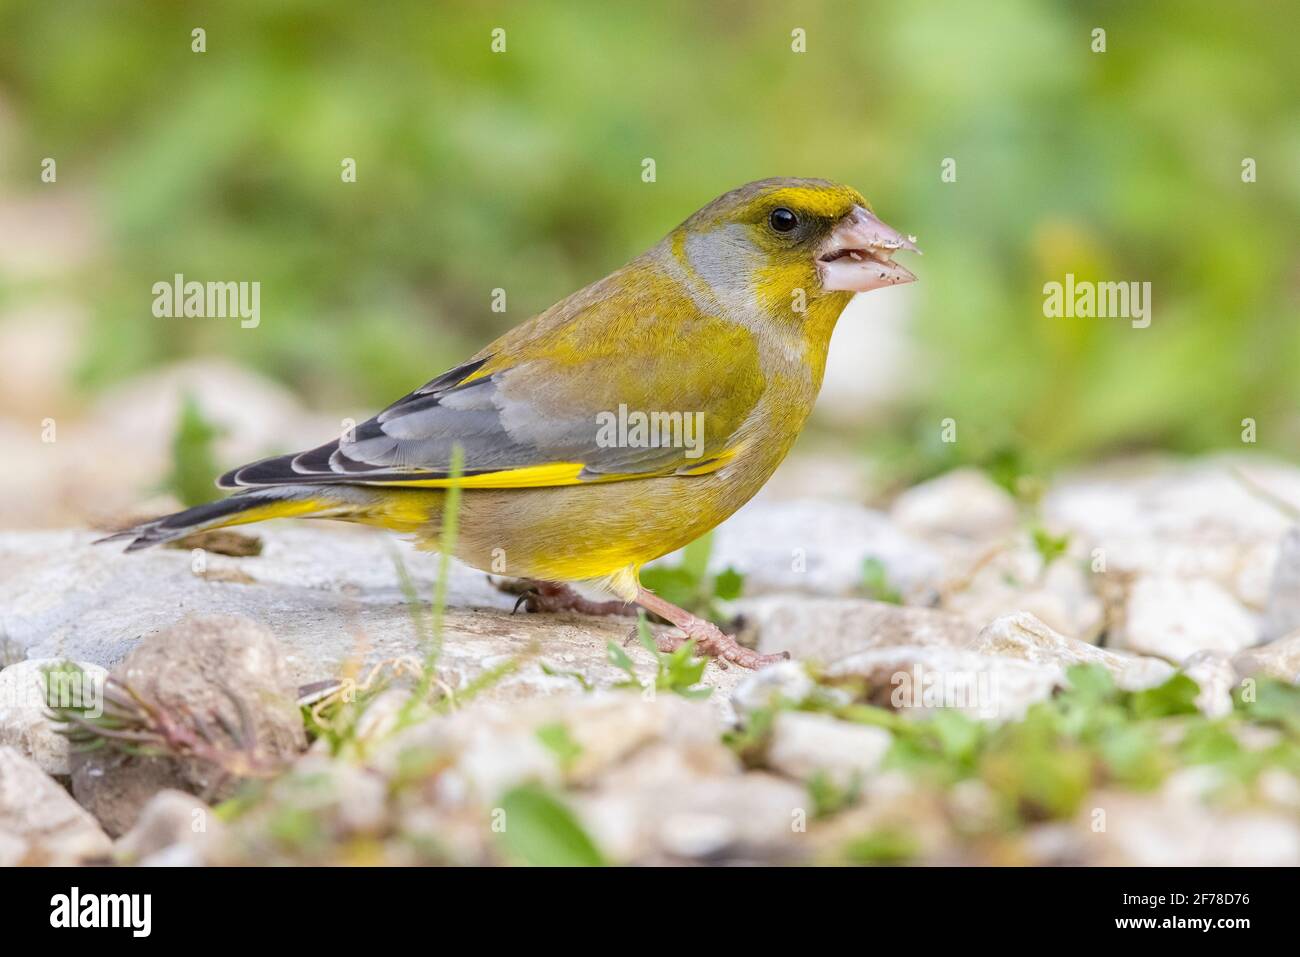 European Greenfinch (Carduelis chloris), side view of an adult male standing on the ground, Campania, Italy Stock Photo